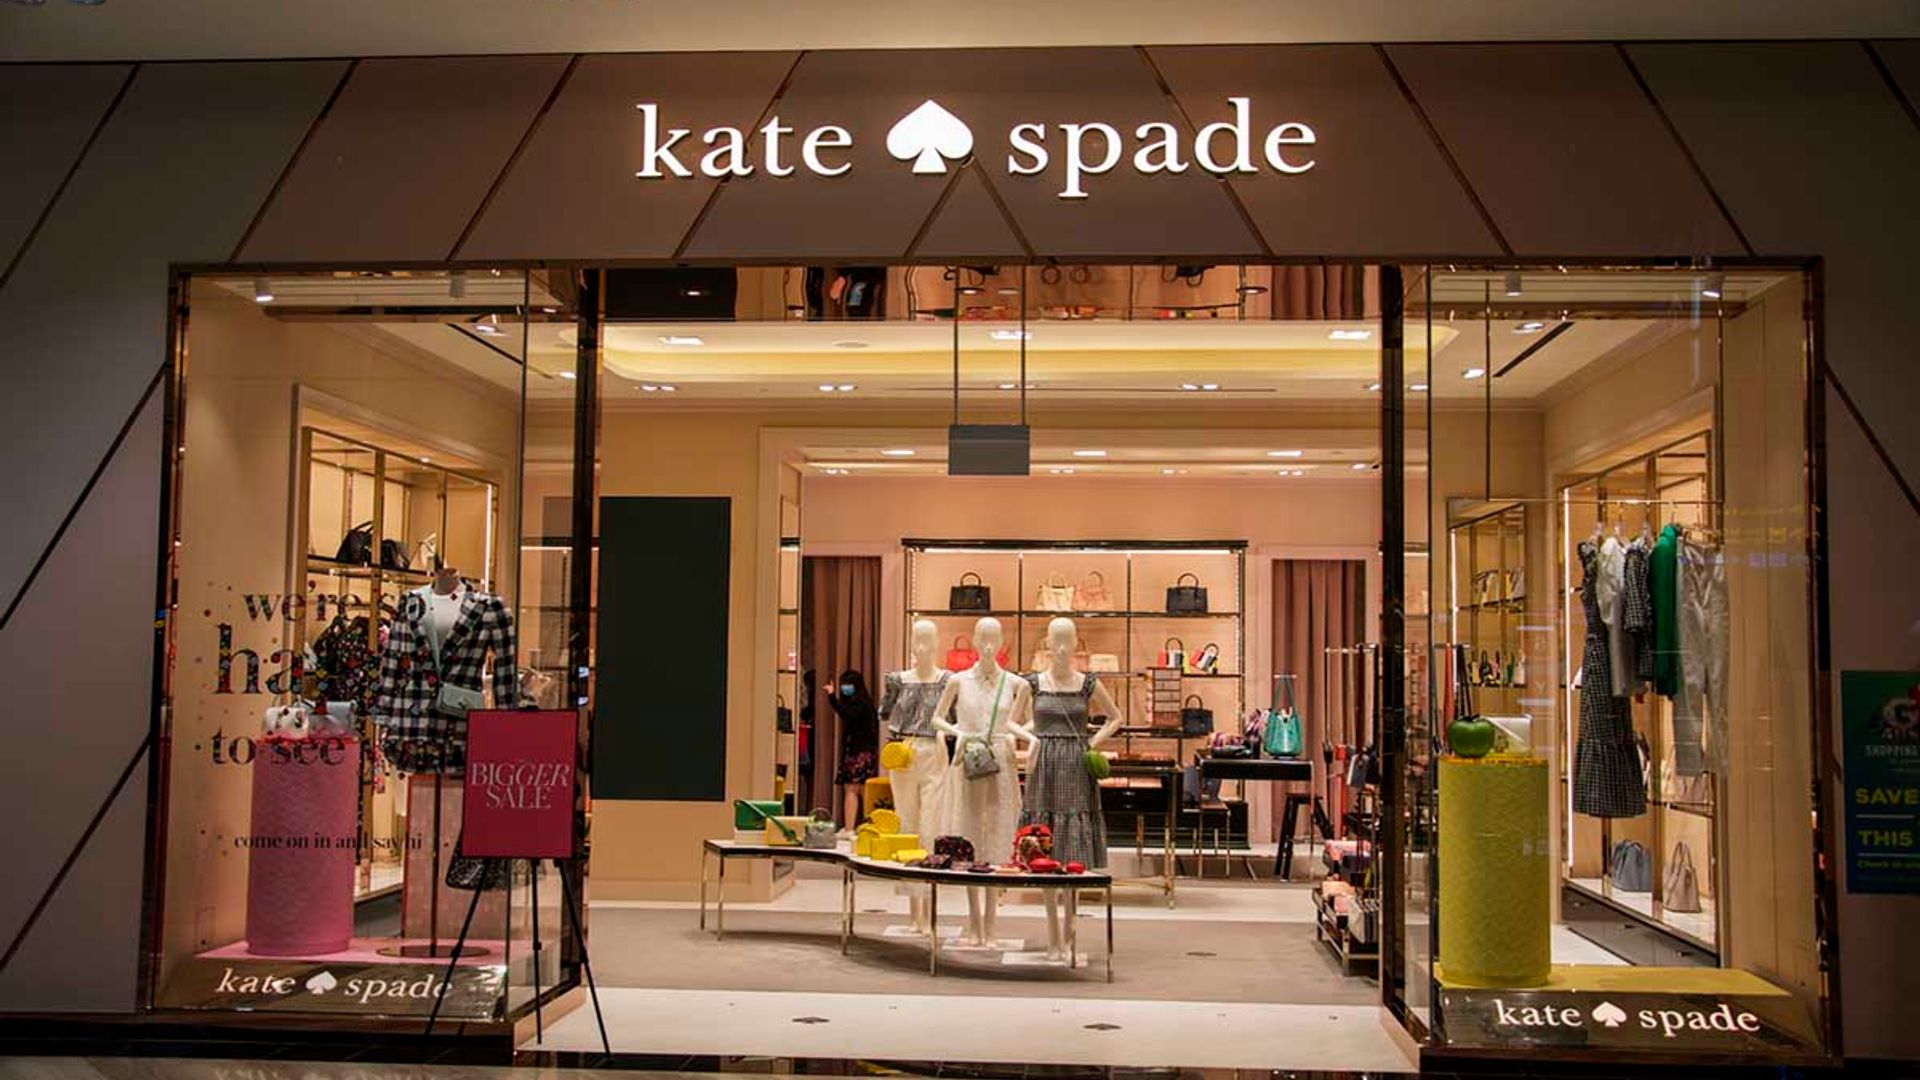 Kate Spade Designer Sale: Save 30% off handbags, jewelry, shoes, and more!  | HELLO!